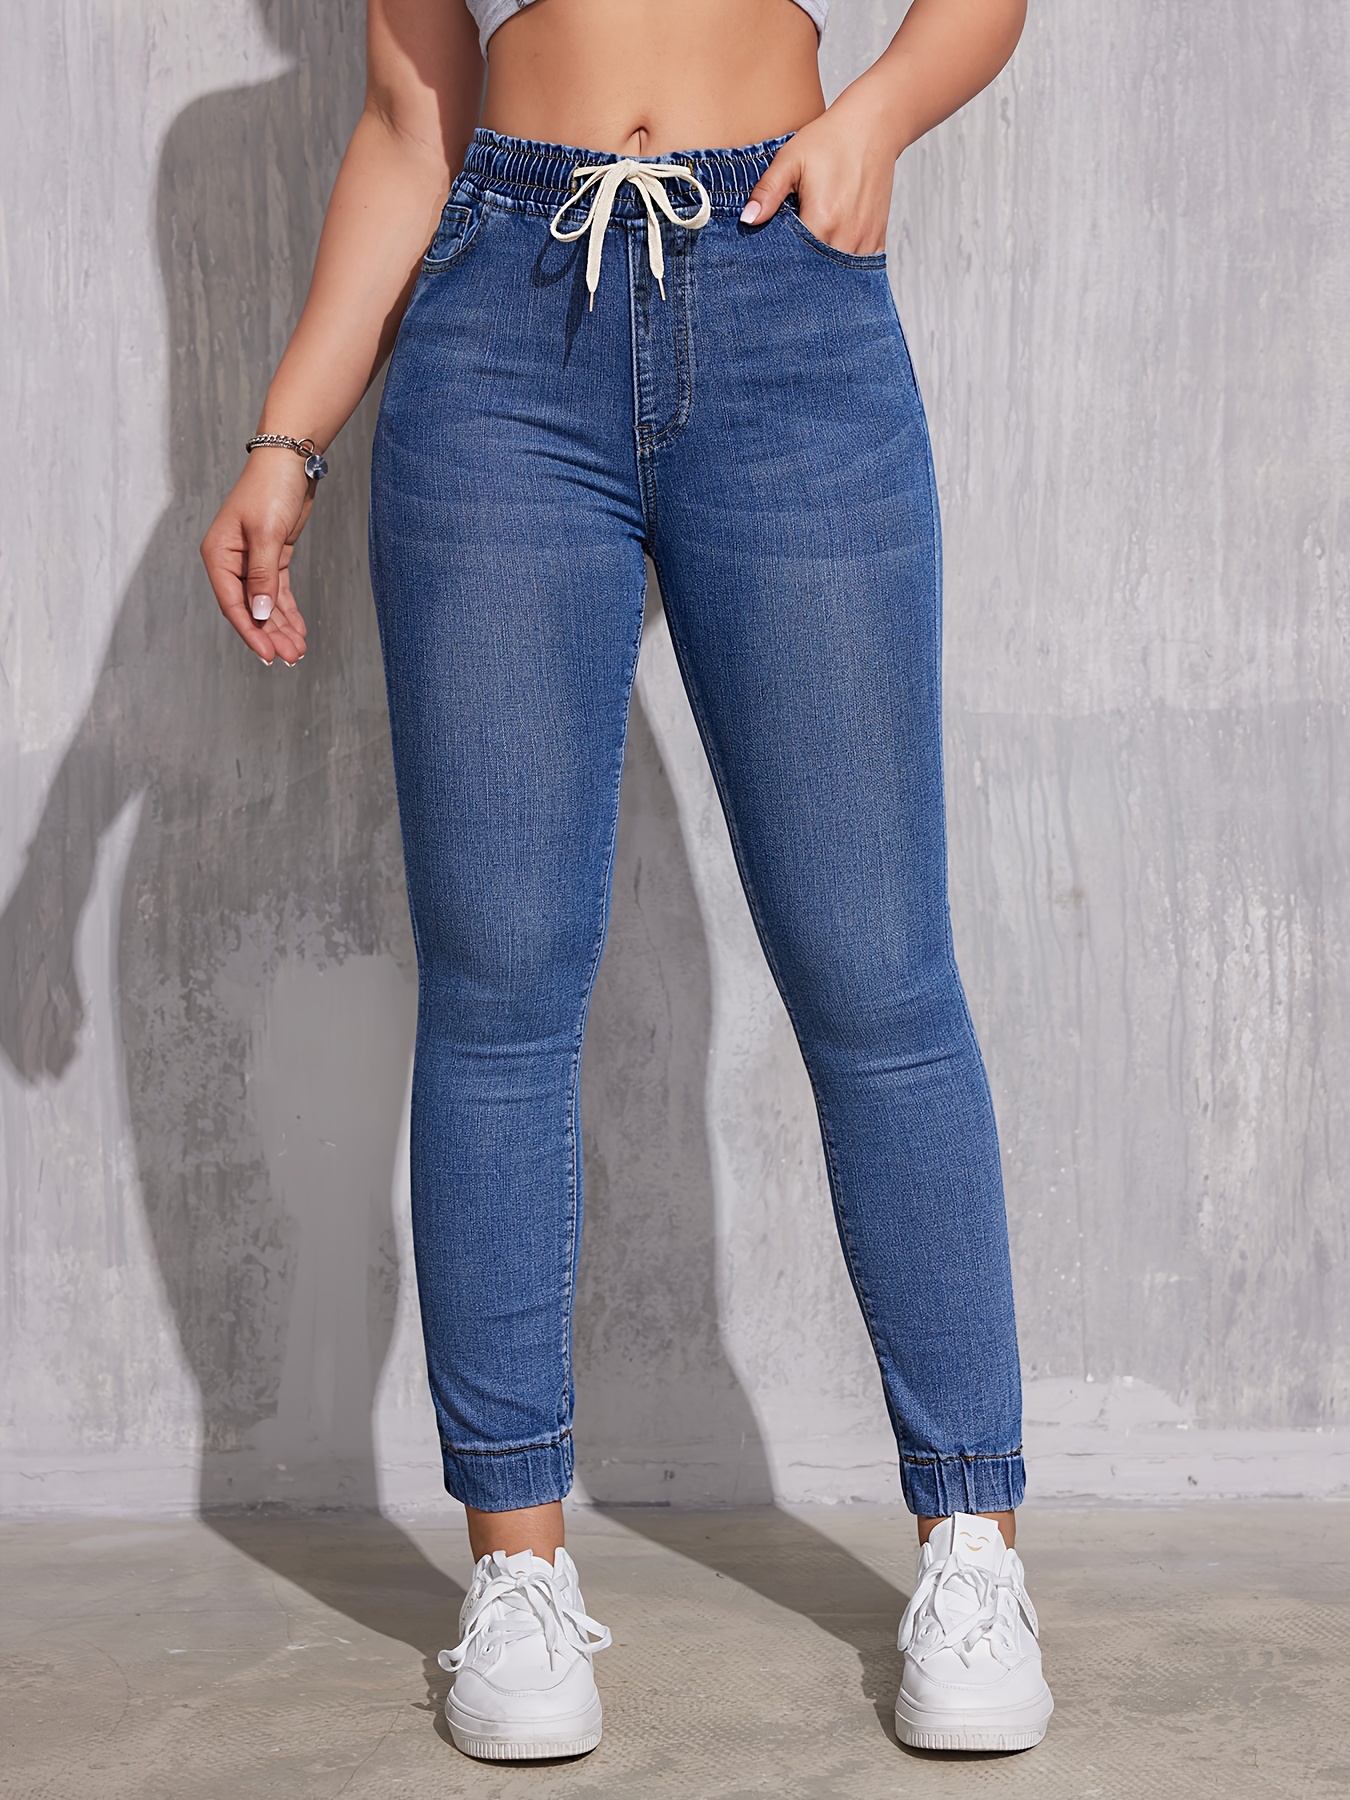 Blue High Waist Elastic Stretch Mid Rise Skinny Jeans For Women Washed  Denim Skinny Pencil Pants By Jeggings From Handsomewear, $20.43